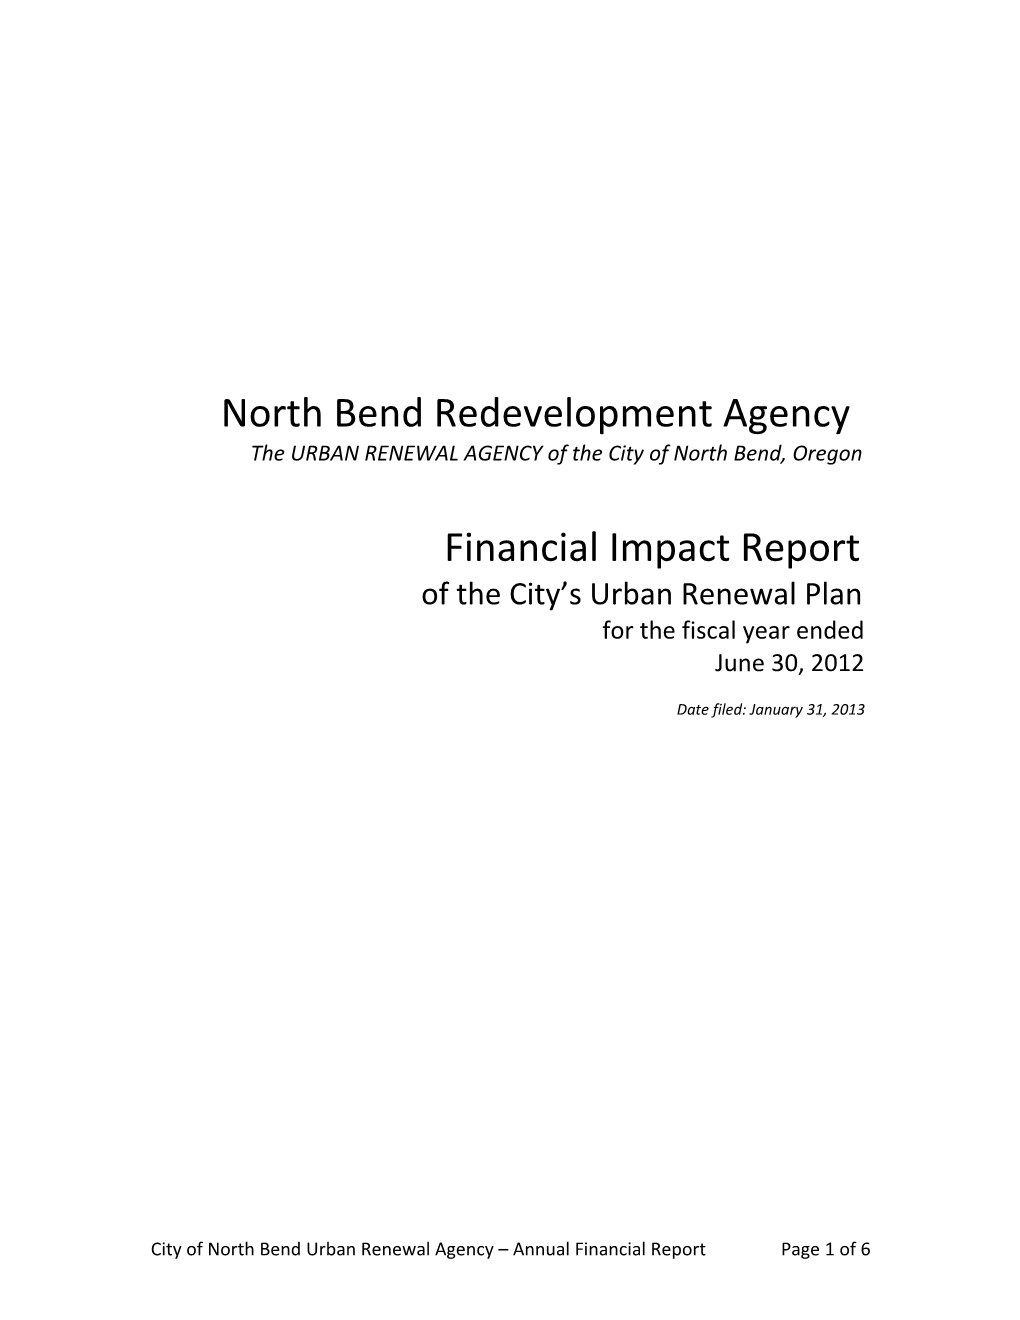 The URBAN RENEWAL AGENCY of the City of North Bend, Oregon